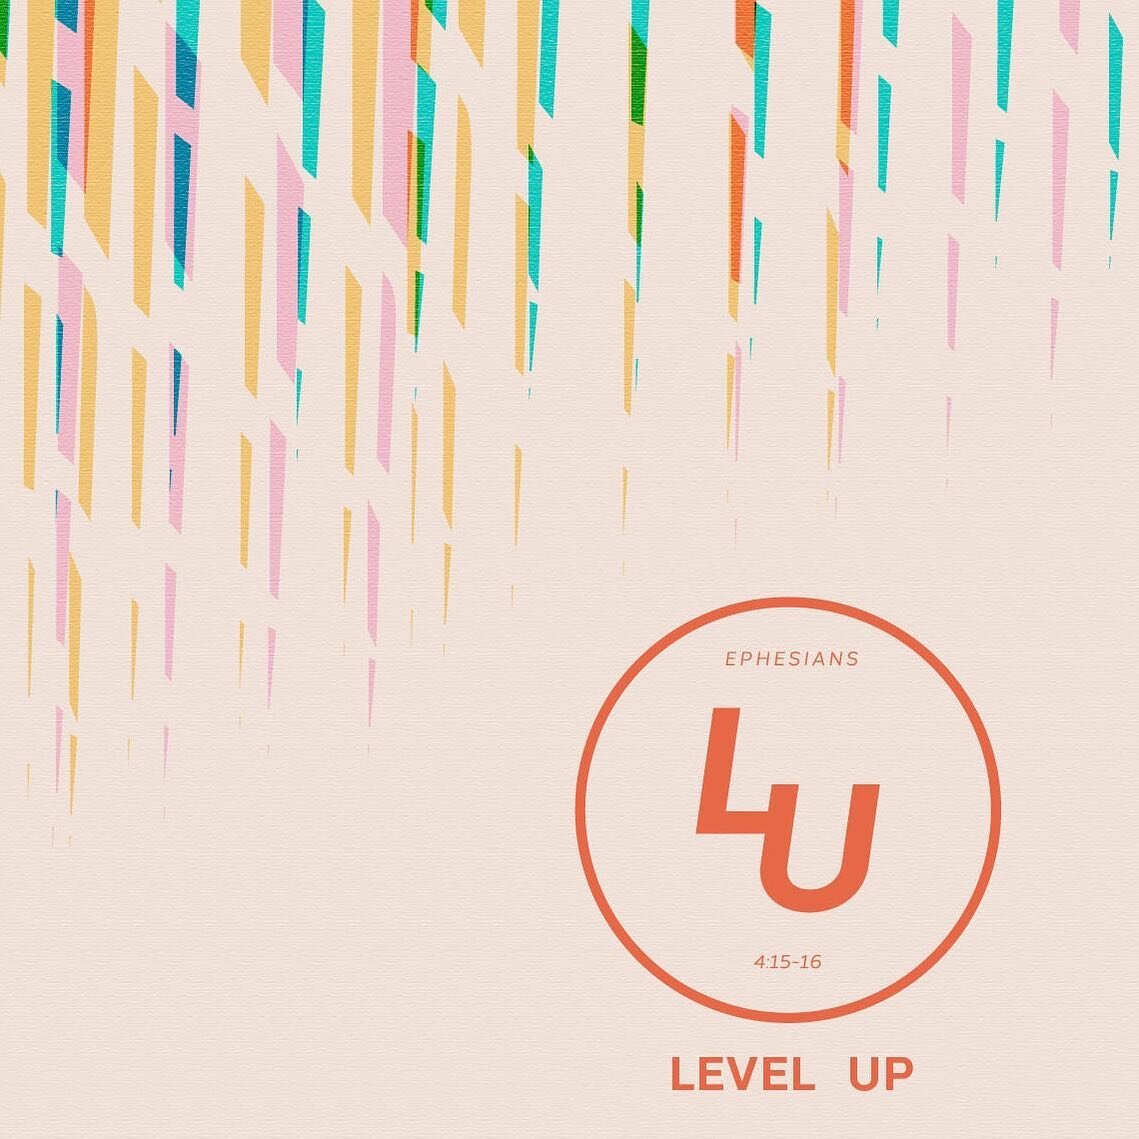 Level Up Leadership Training is designed for pastors and leaders of children, middle school, high school and young adult ministries. It exists to equip, encourage and empower leaders within their ministry context. This event is designed to develop an